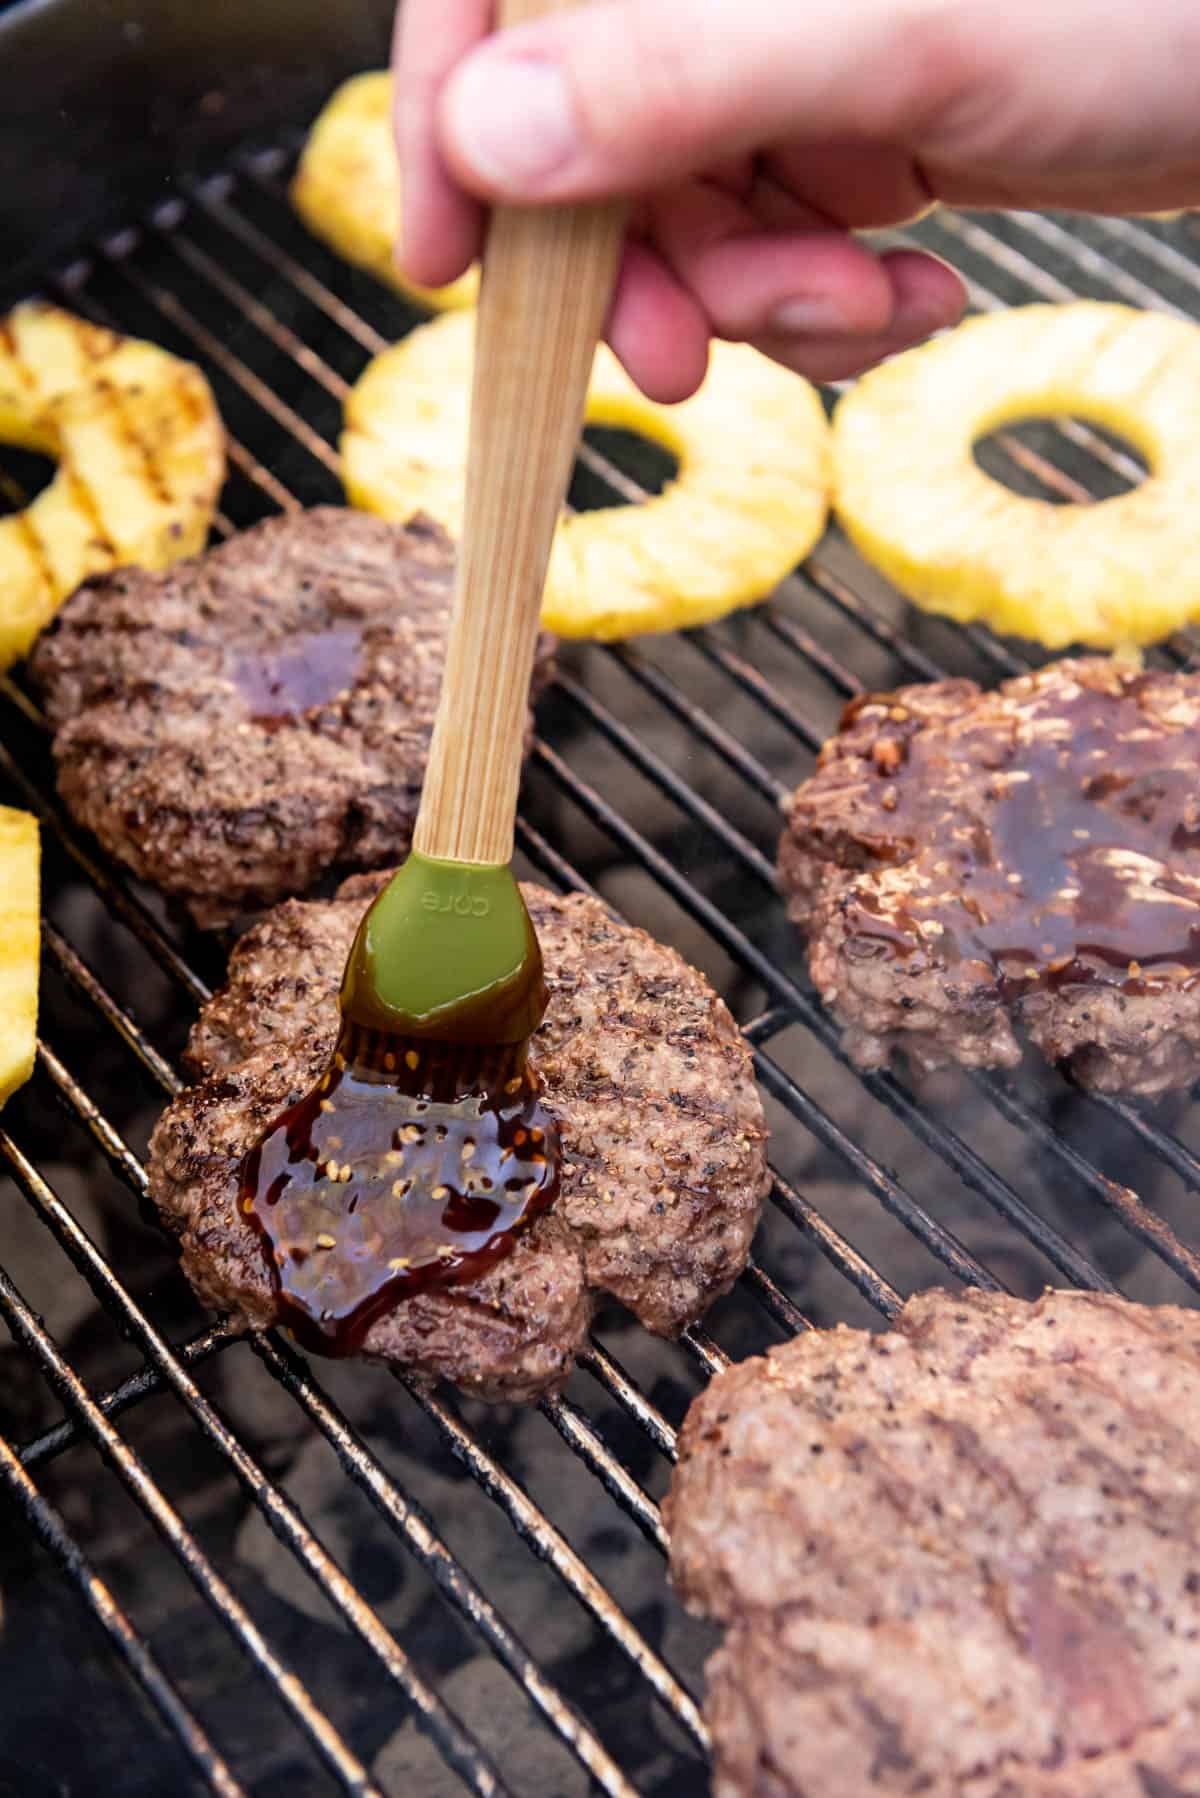 Brushing burgers with teriyaki sauce while they are finishing on the grill before adding cheese.